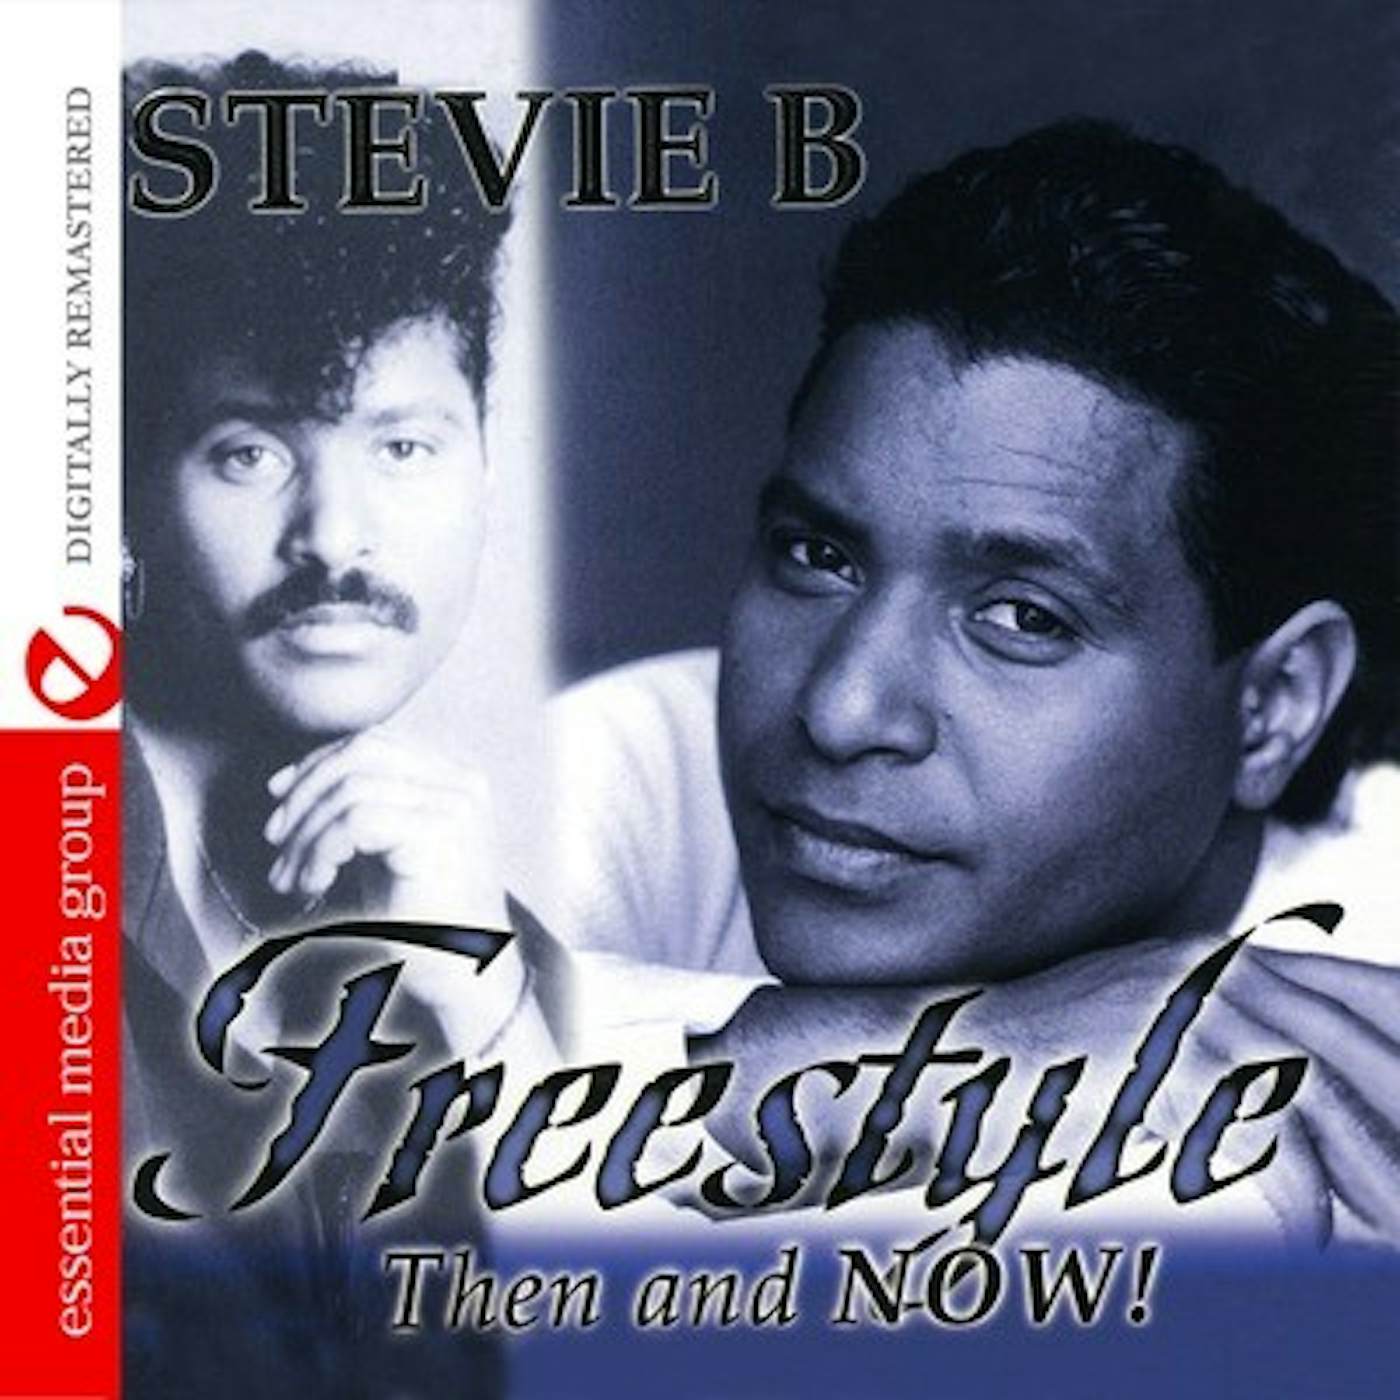 Stevie B FREESTYLE THEN & NOW CD